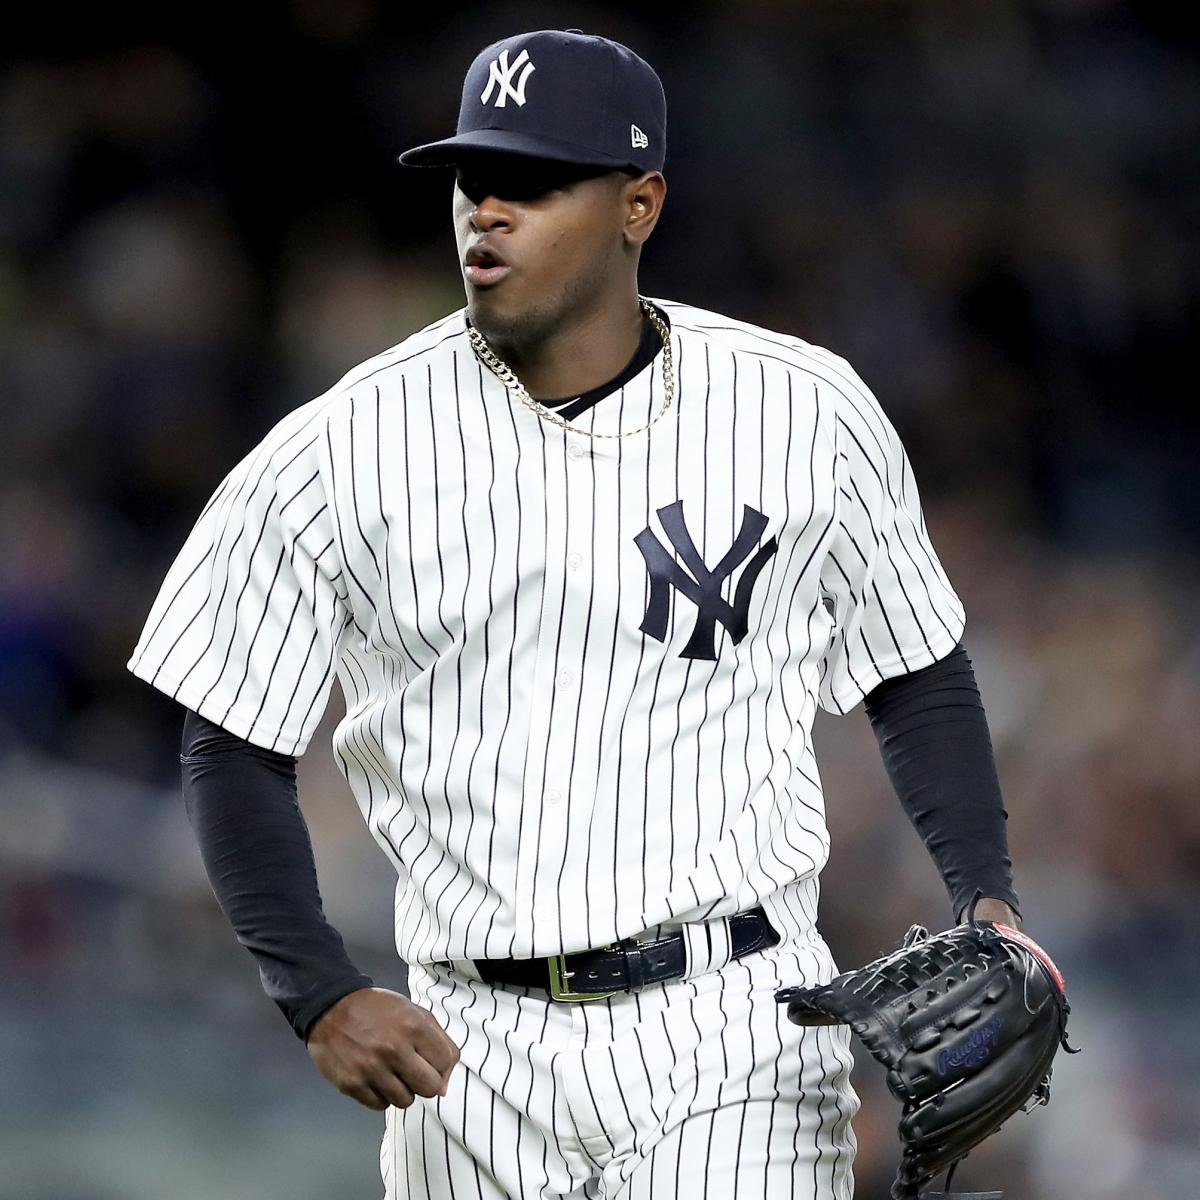 Luis Severino: The Yankees desperately need ace to compete with